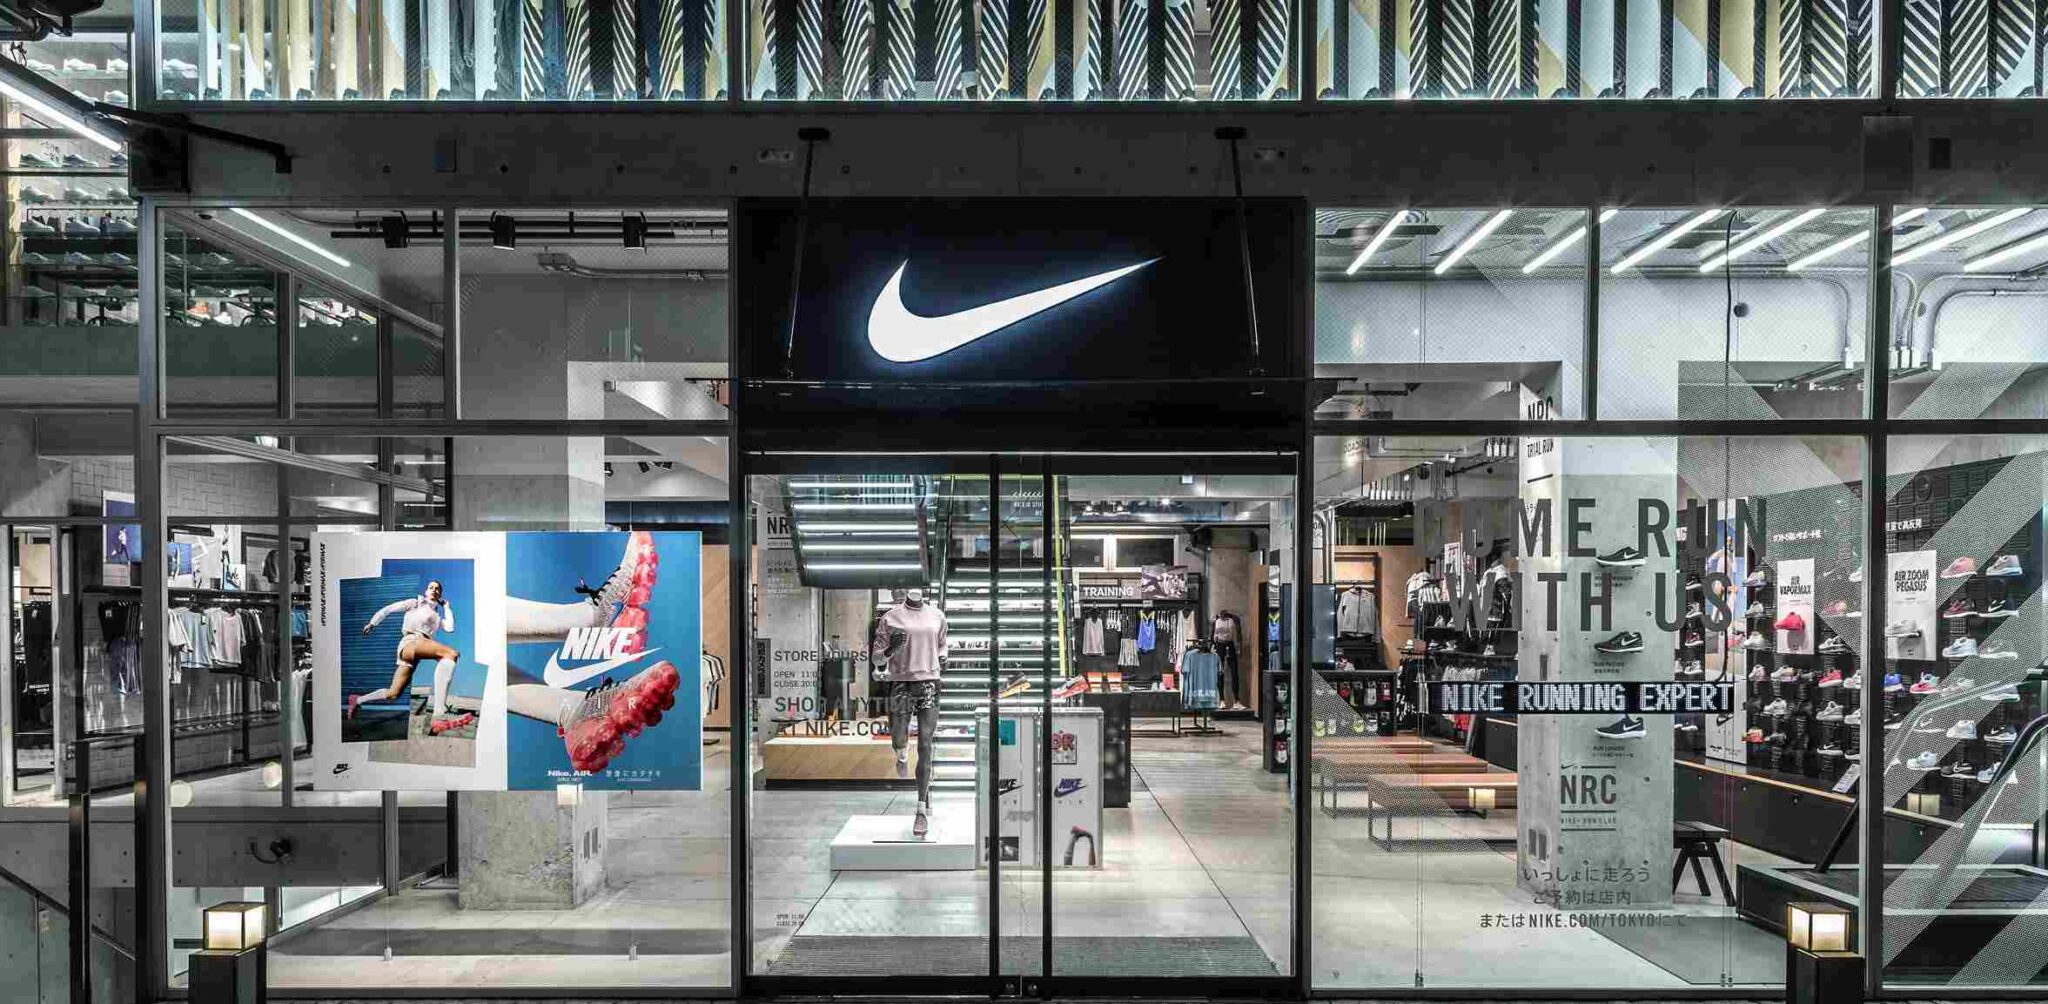 The World's Biggest Nike Stores: Top 10 Locations